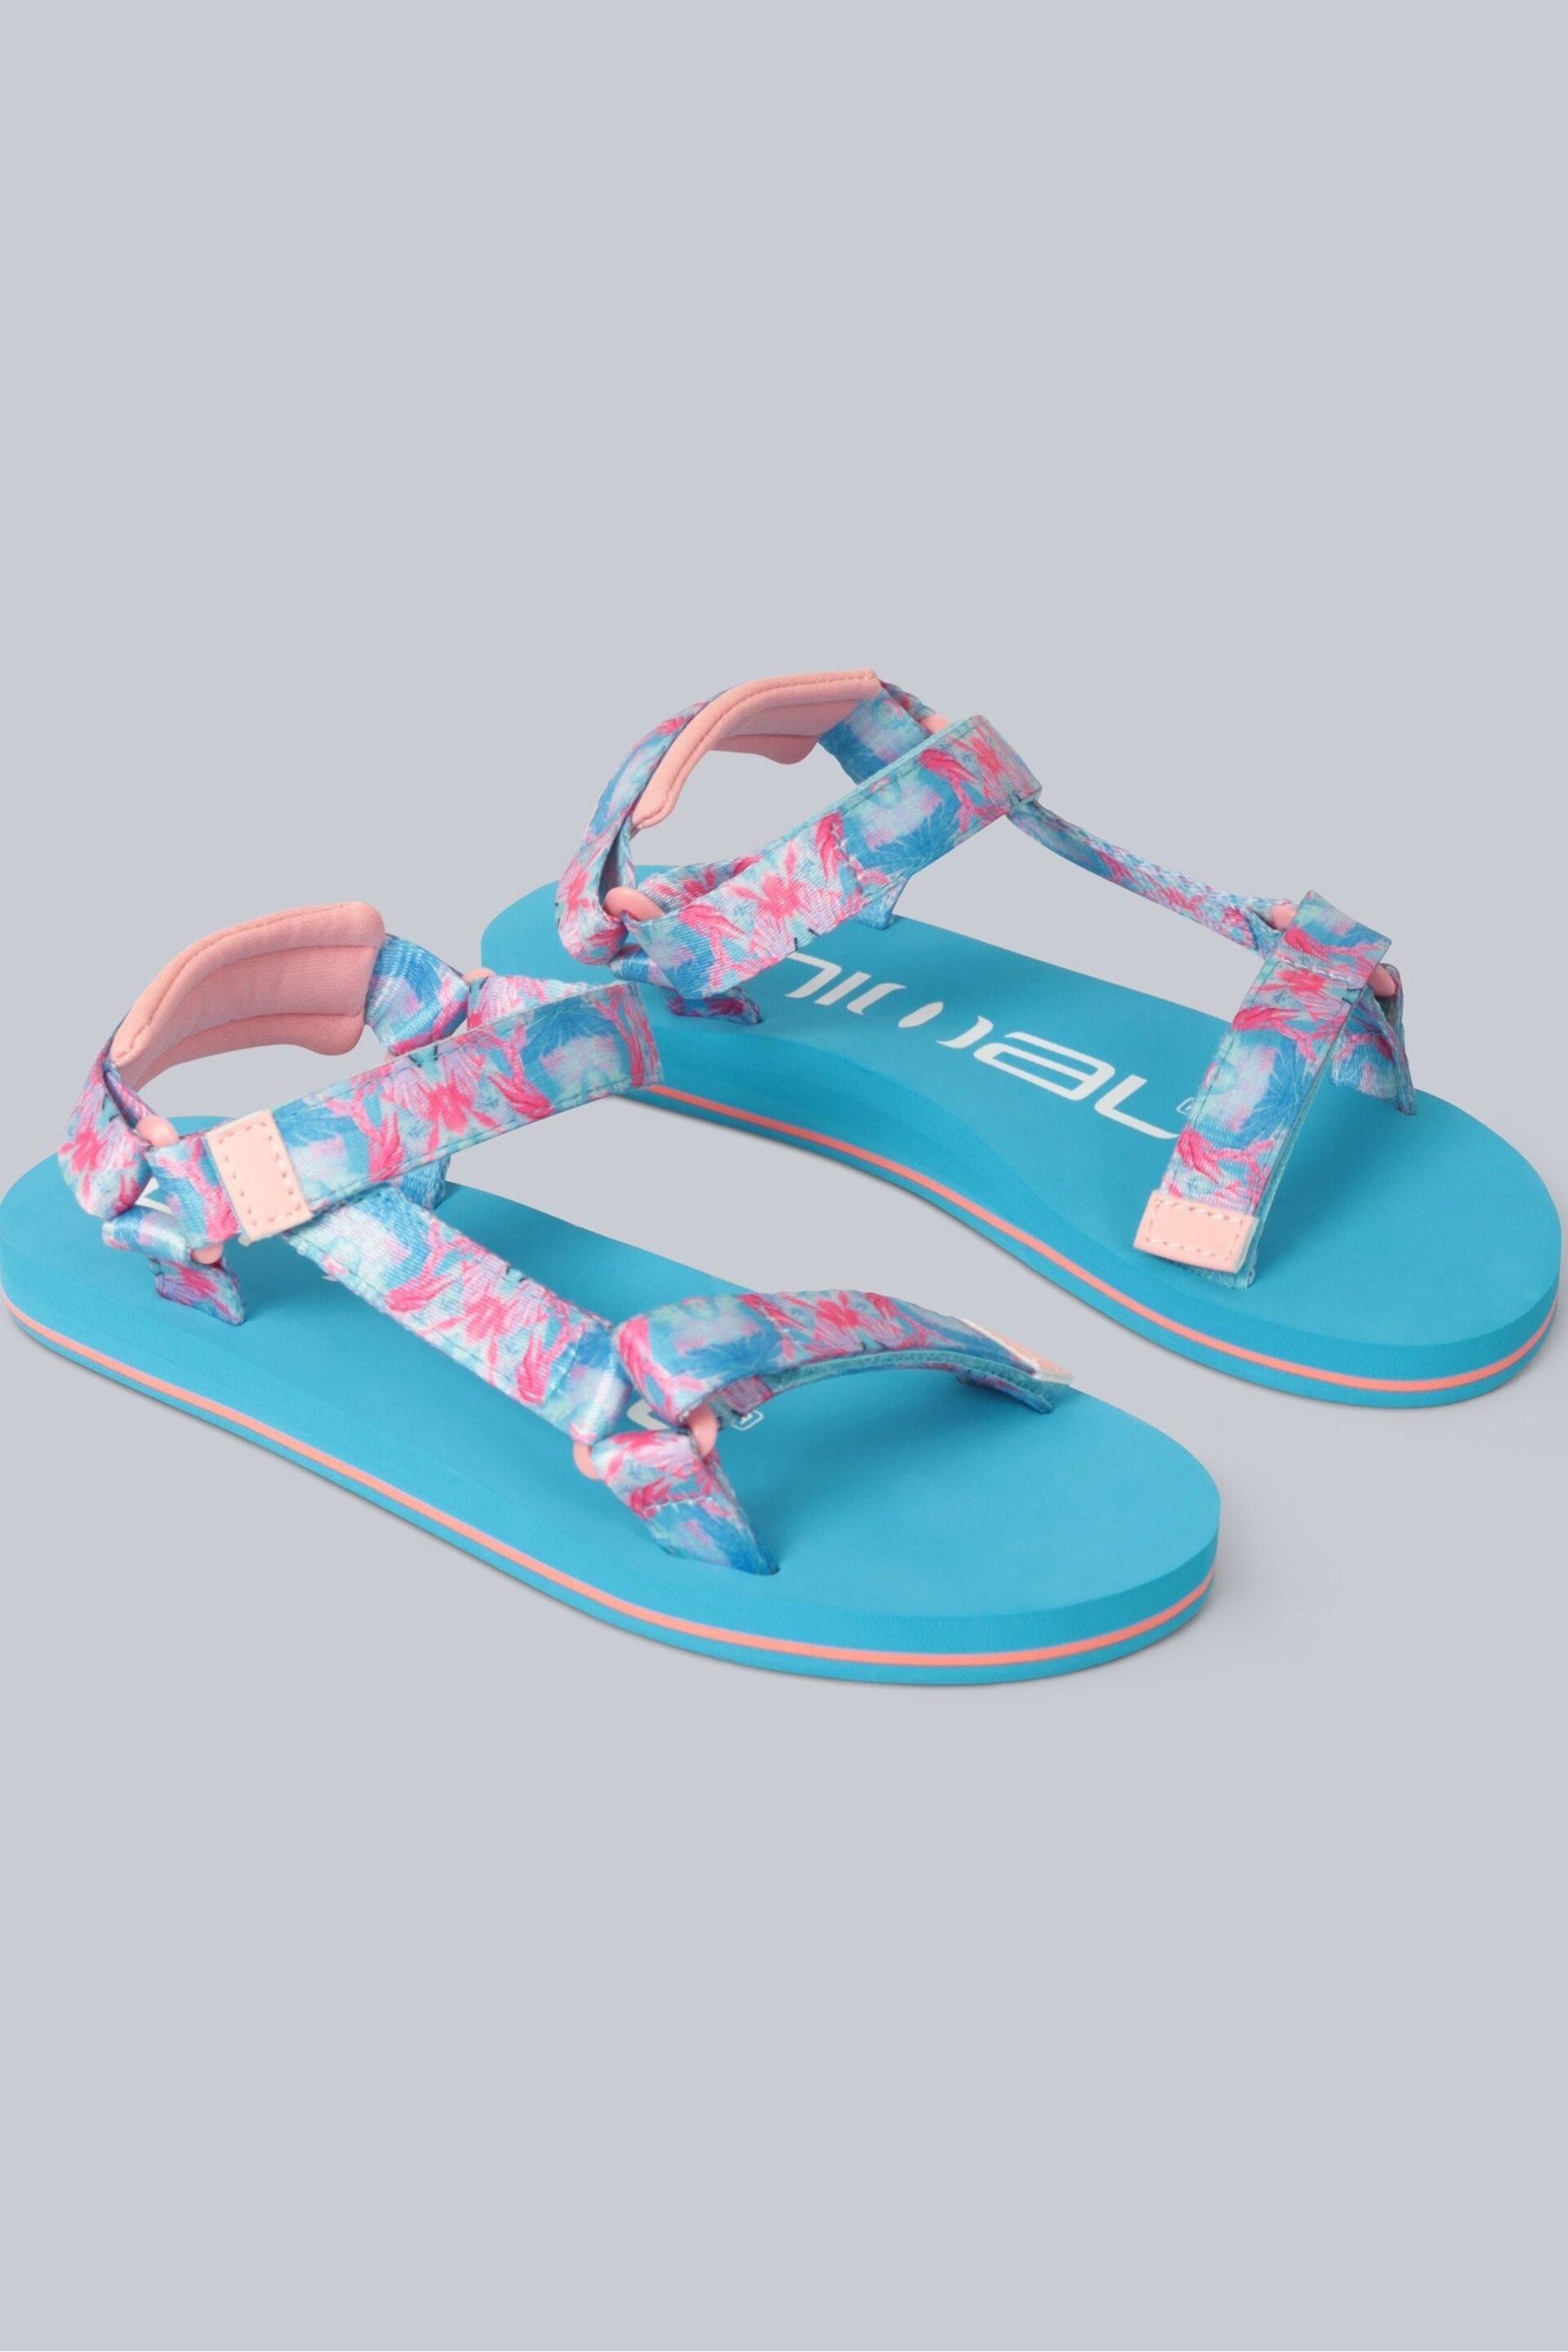 Animal Kids Blue Drift Recycled Sandals - Image 4 of 7